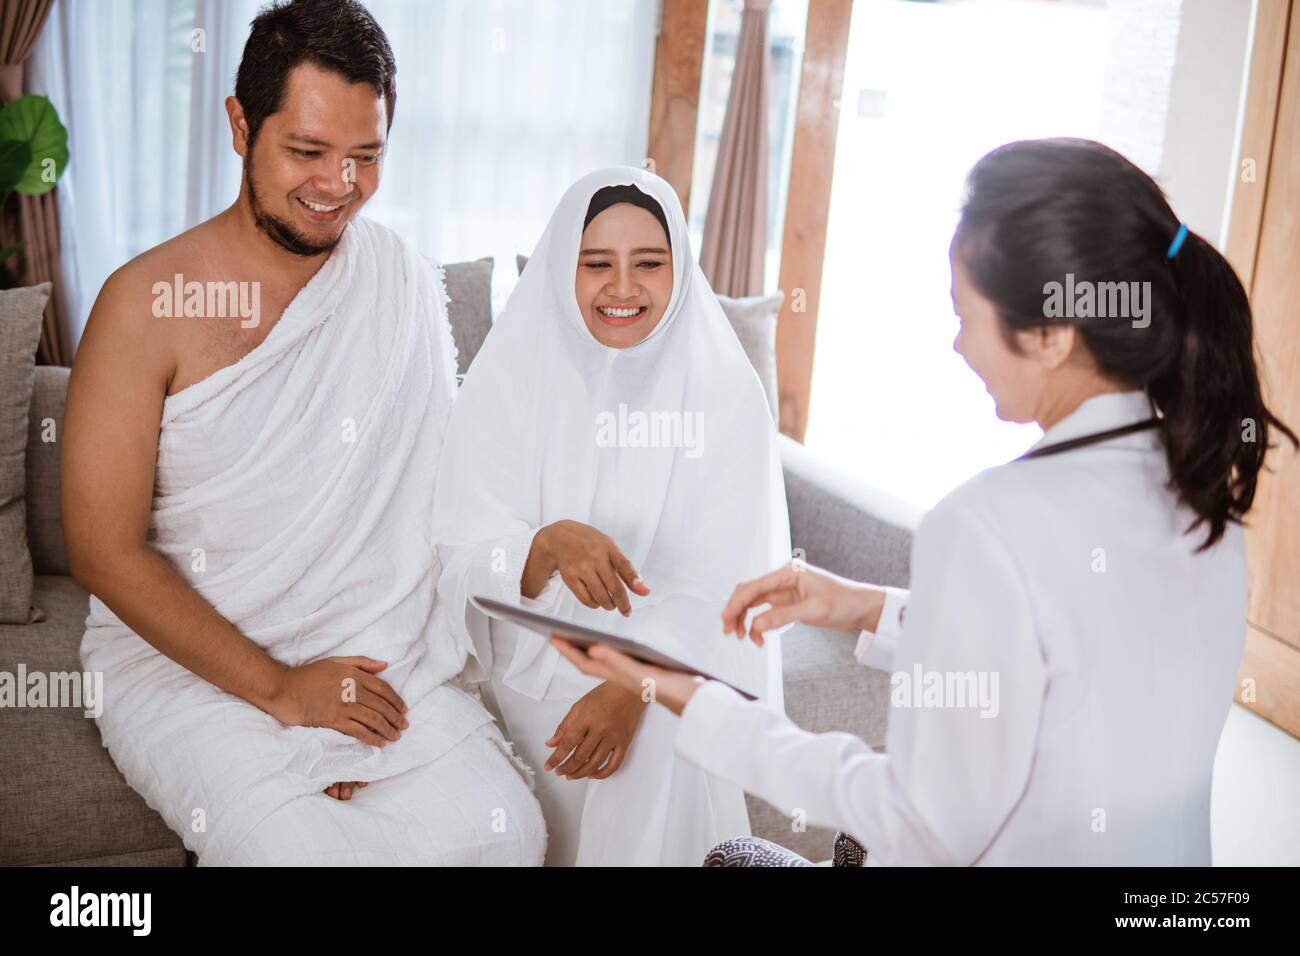 muslim medical checkup before hajj or umrah with doctor Stock Photo